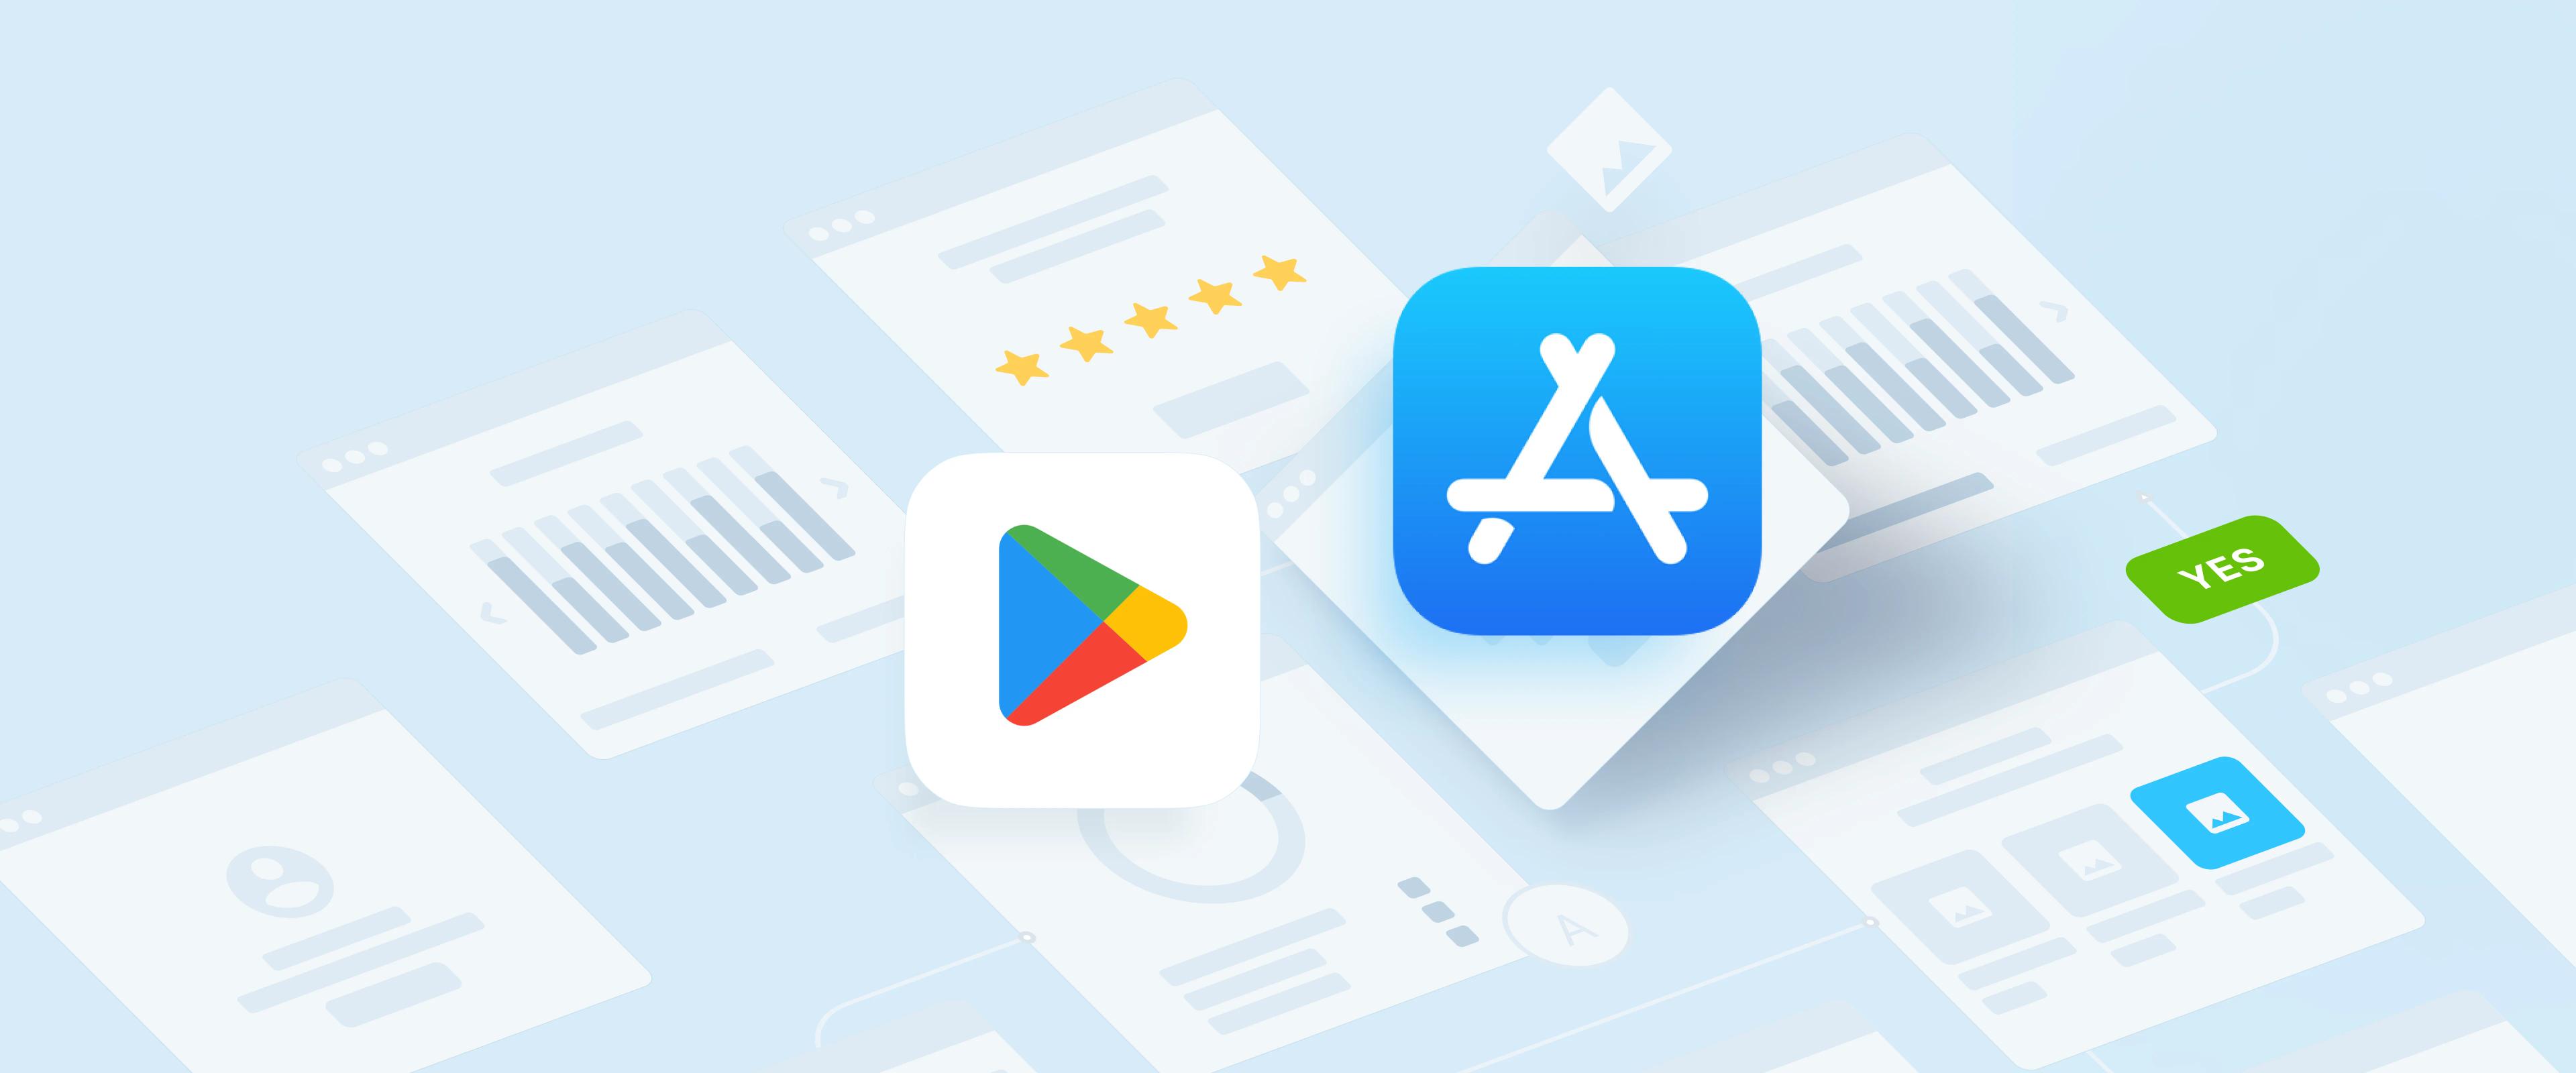 Google play and App store icons on blue background